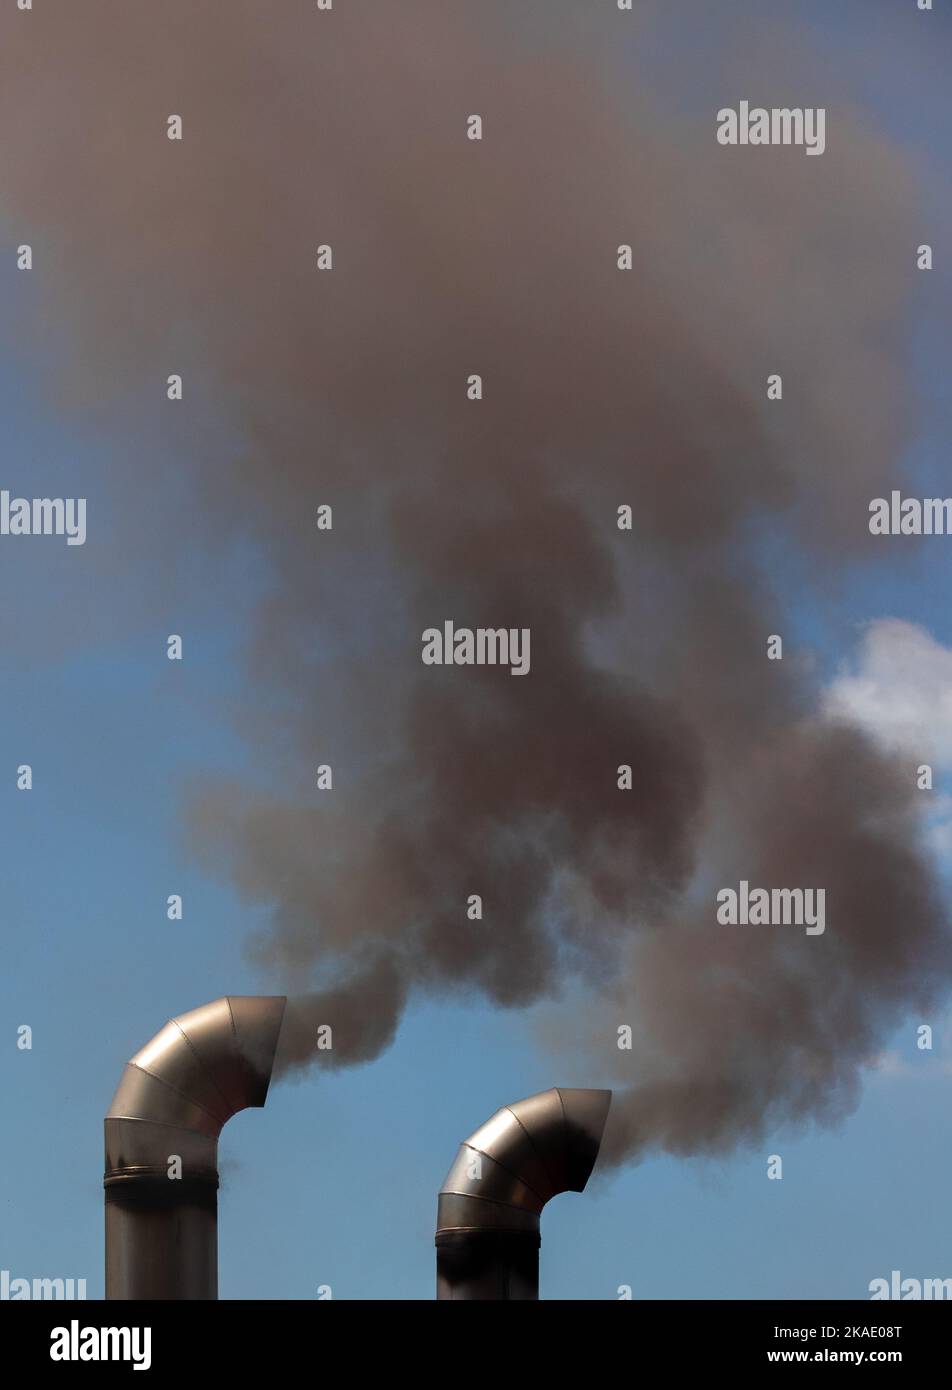 Smoke coming out of two chimneys, toxic, pollution Stock Photo